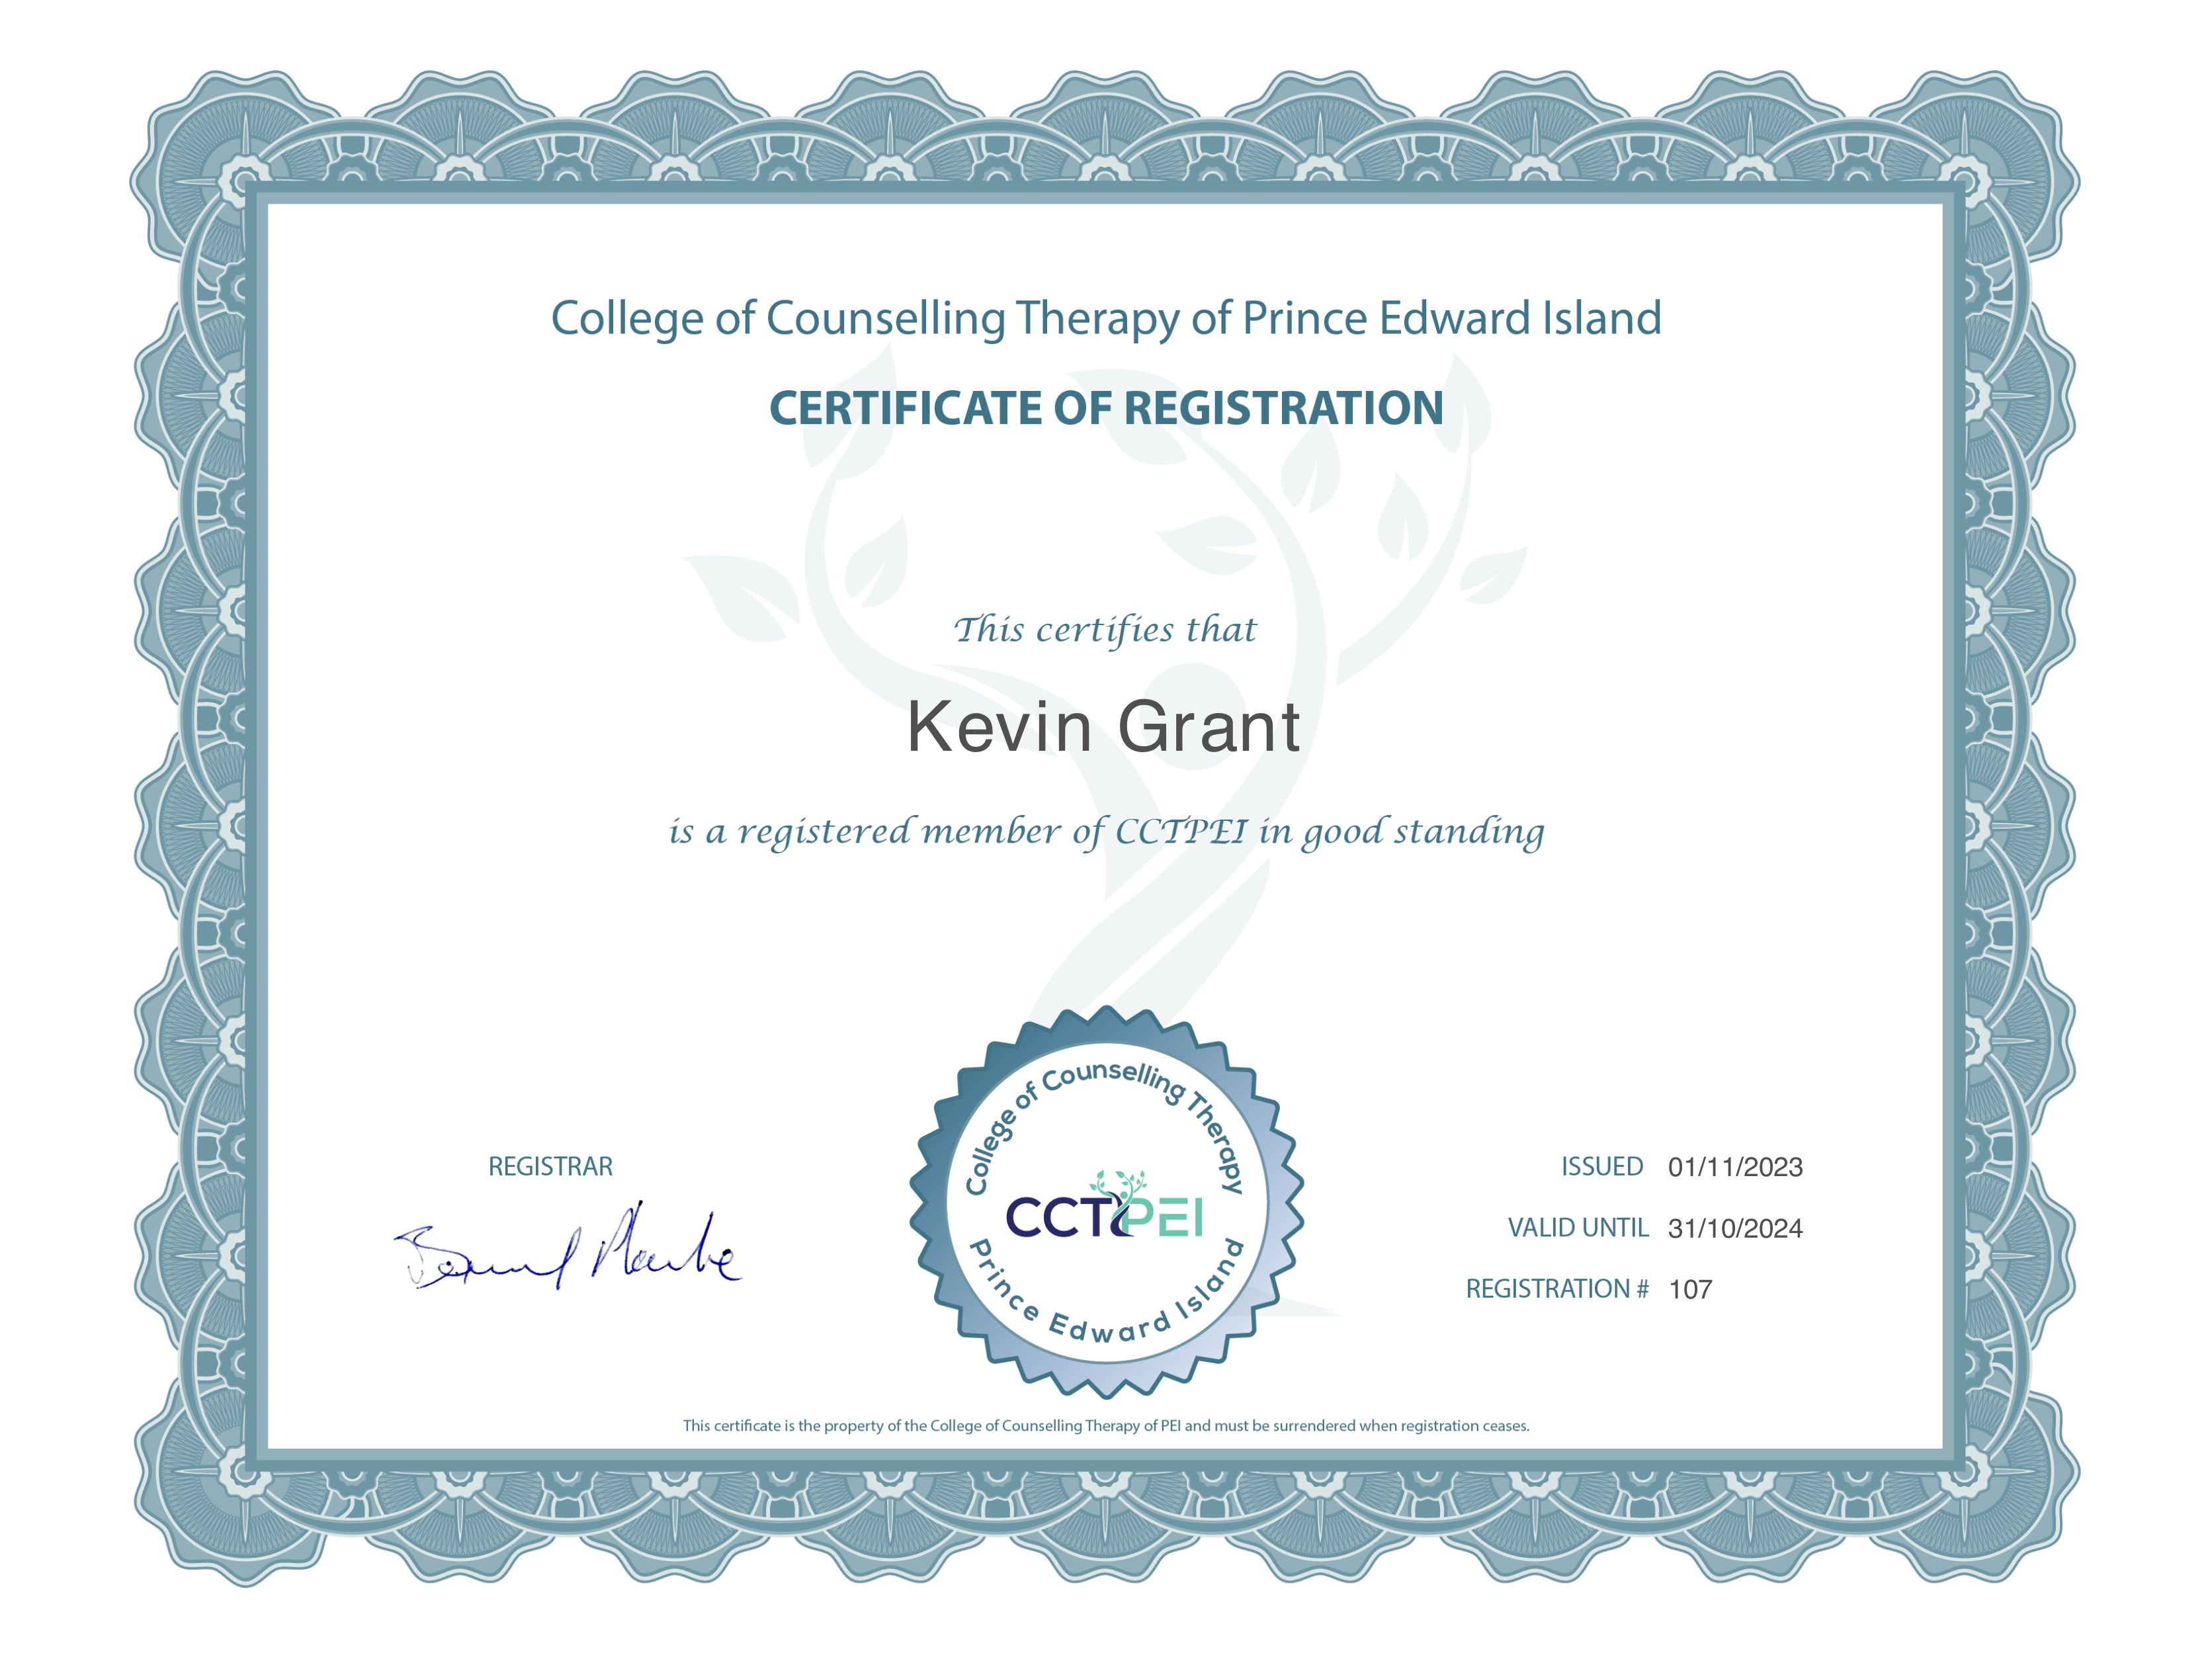 College of Counselling Therapy of Prince Edward Island - Certificate of Registration